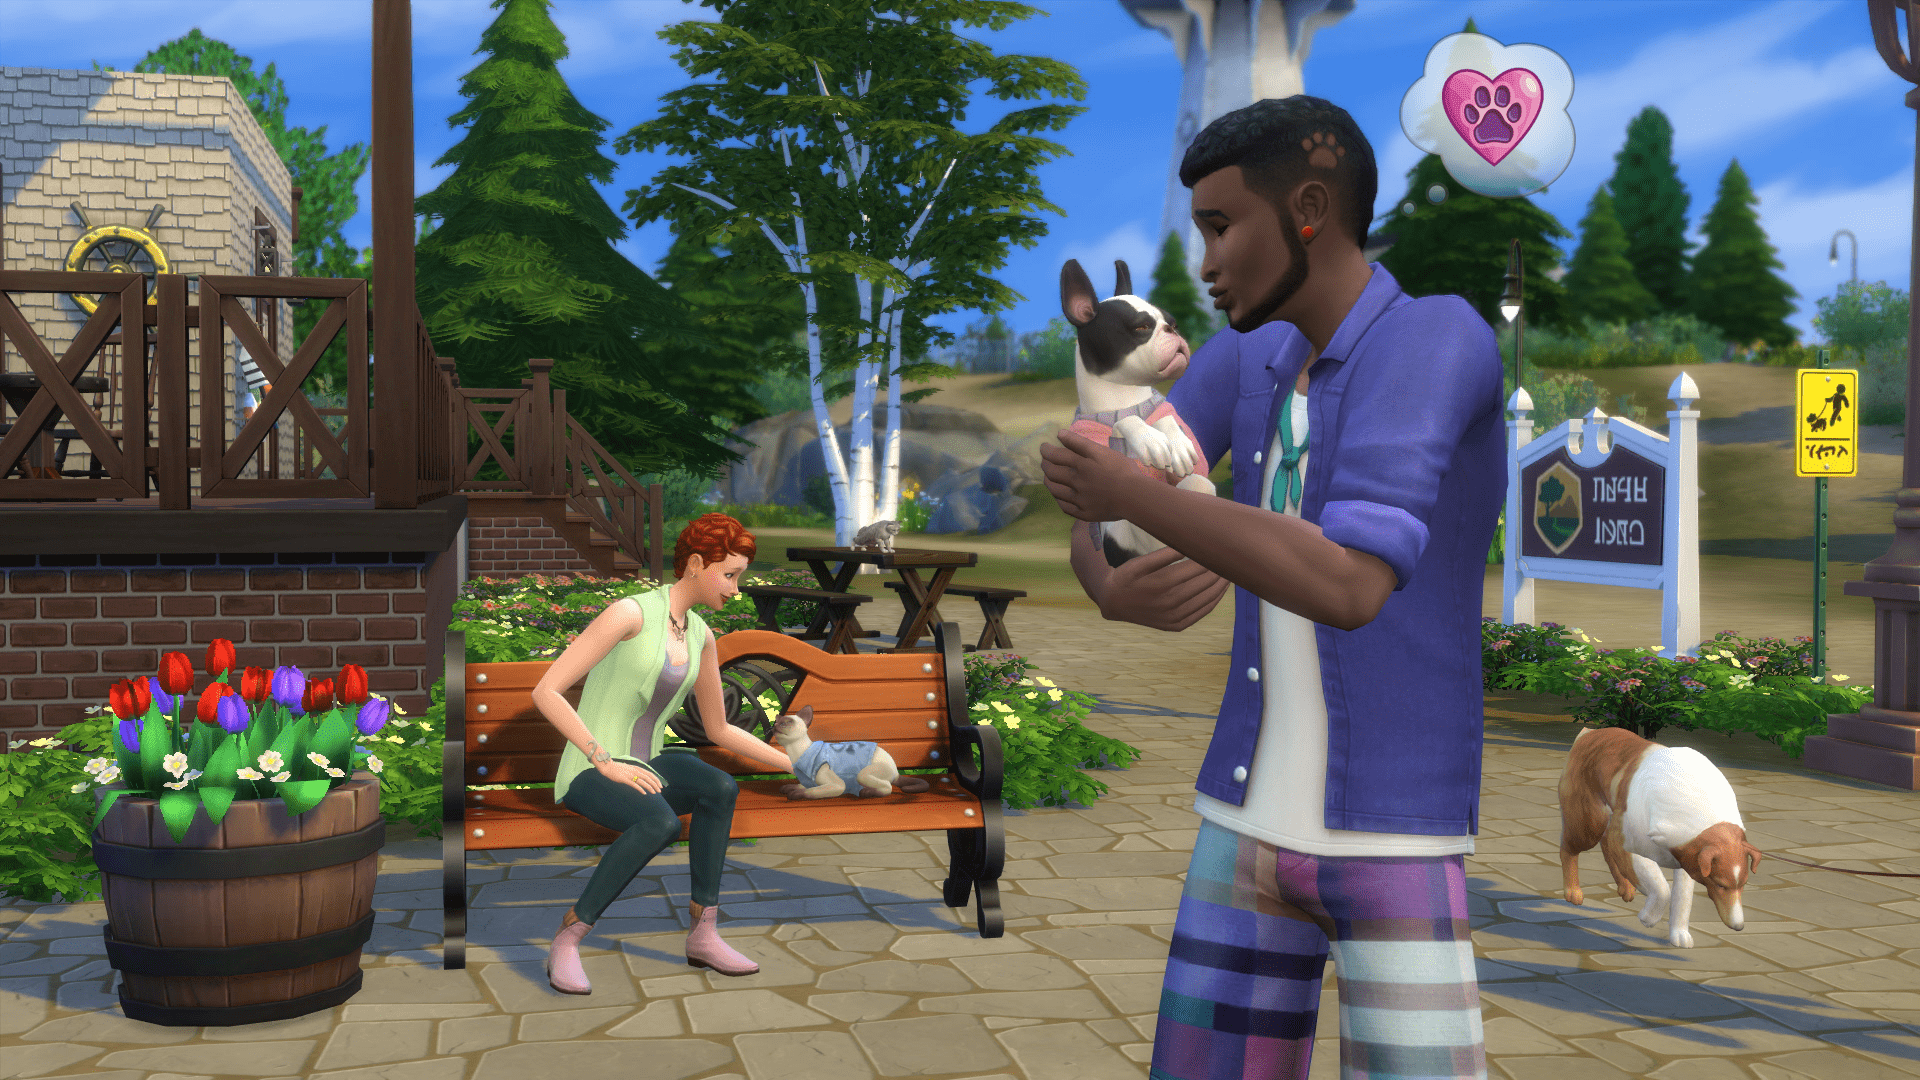 how do you get feathers in the sims 4 cats and dogs?